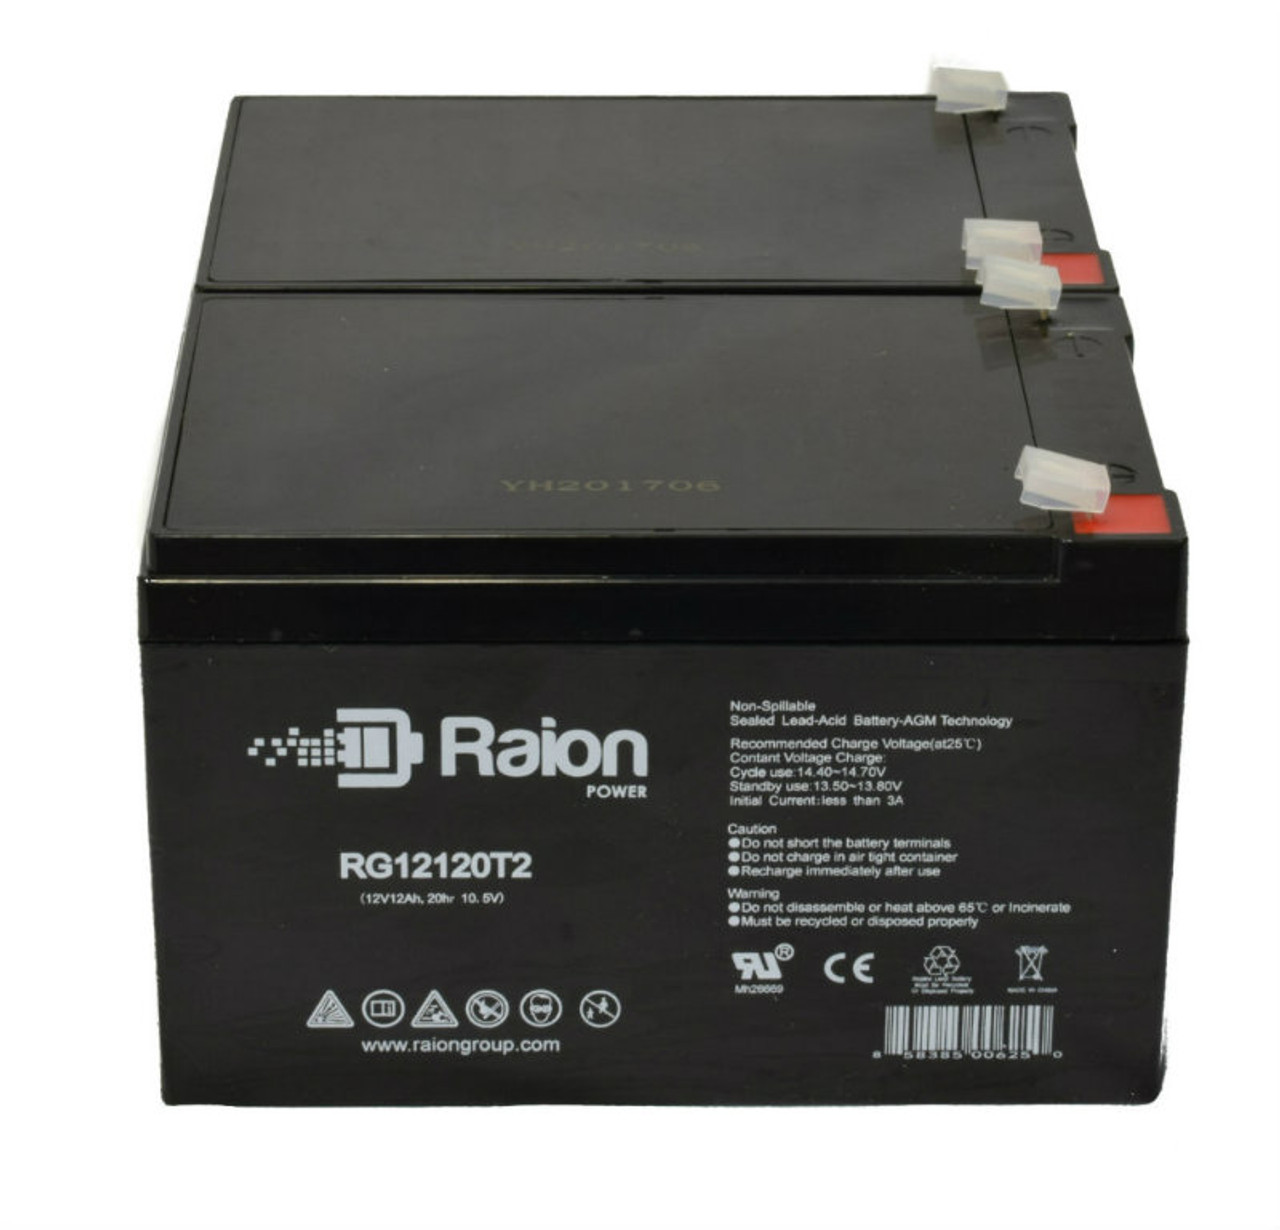 Raion Power 12V 12Ah Replacement Alarm Security System Battery for Altronix AL1024ULXPD8 - 2 Pack